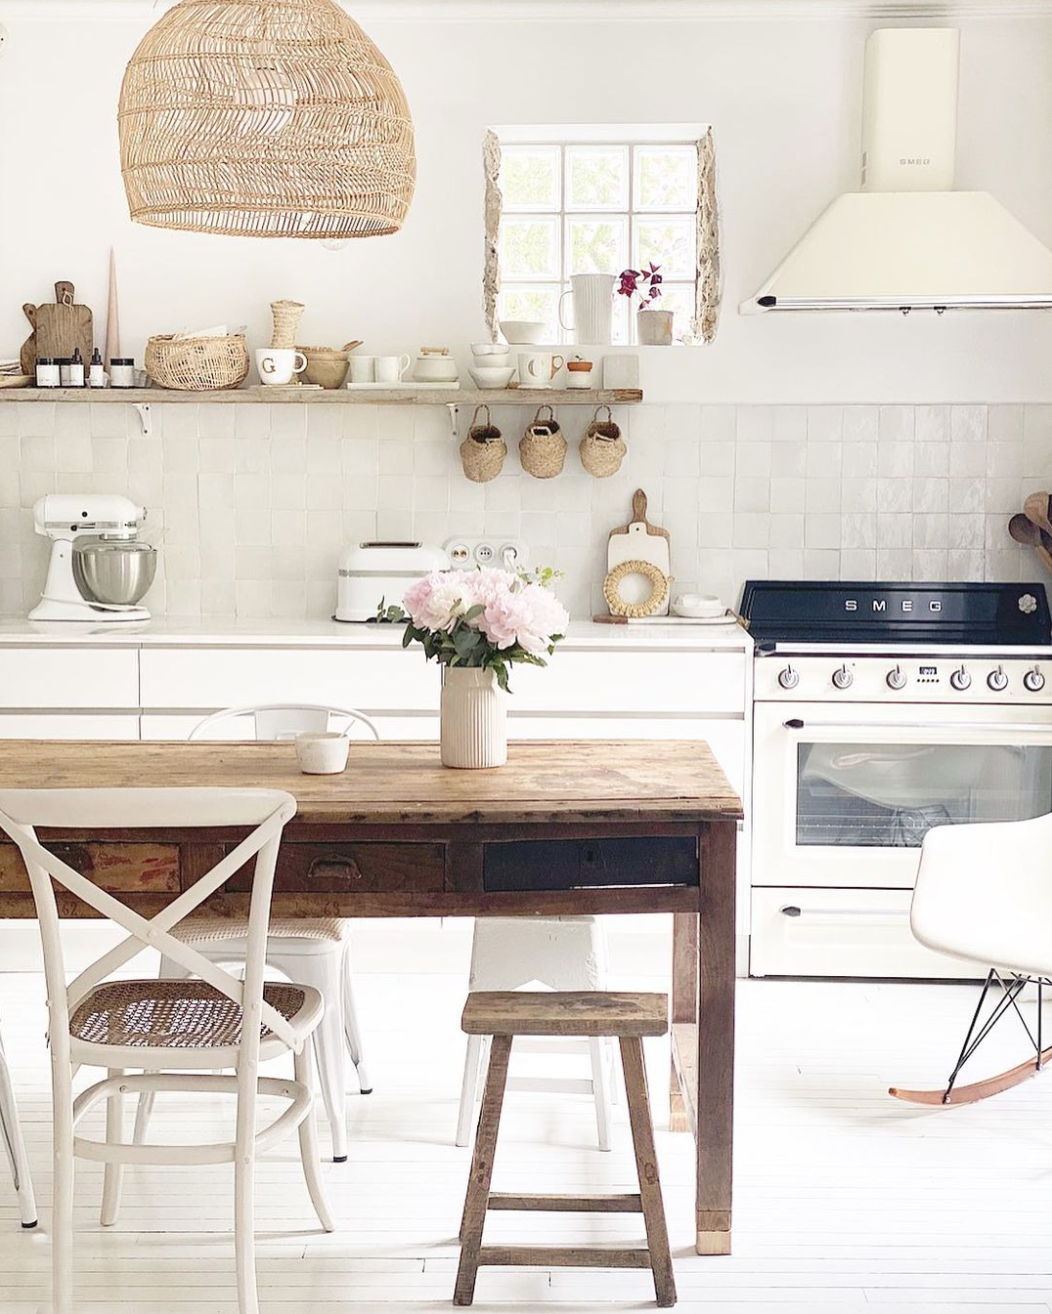 HOME TOUR with Carole Goupil aka @greenpatchouly - featured on 91 Magazine